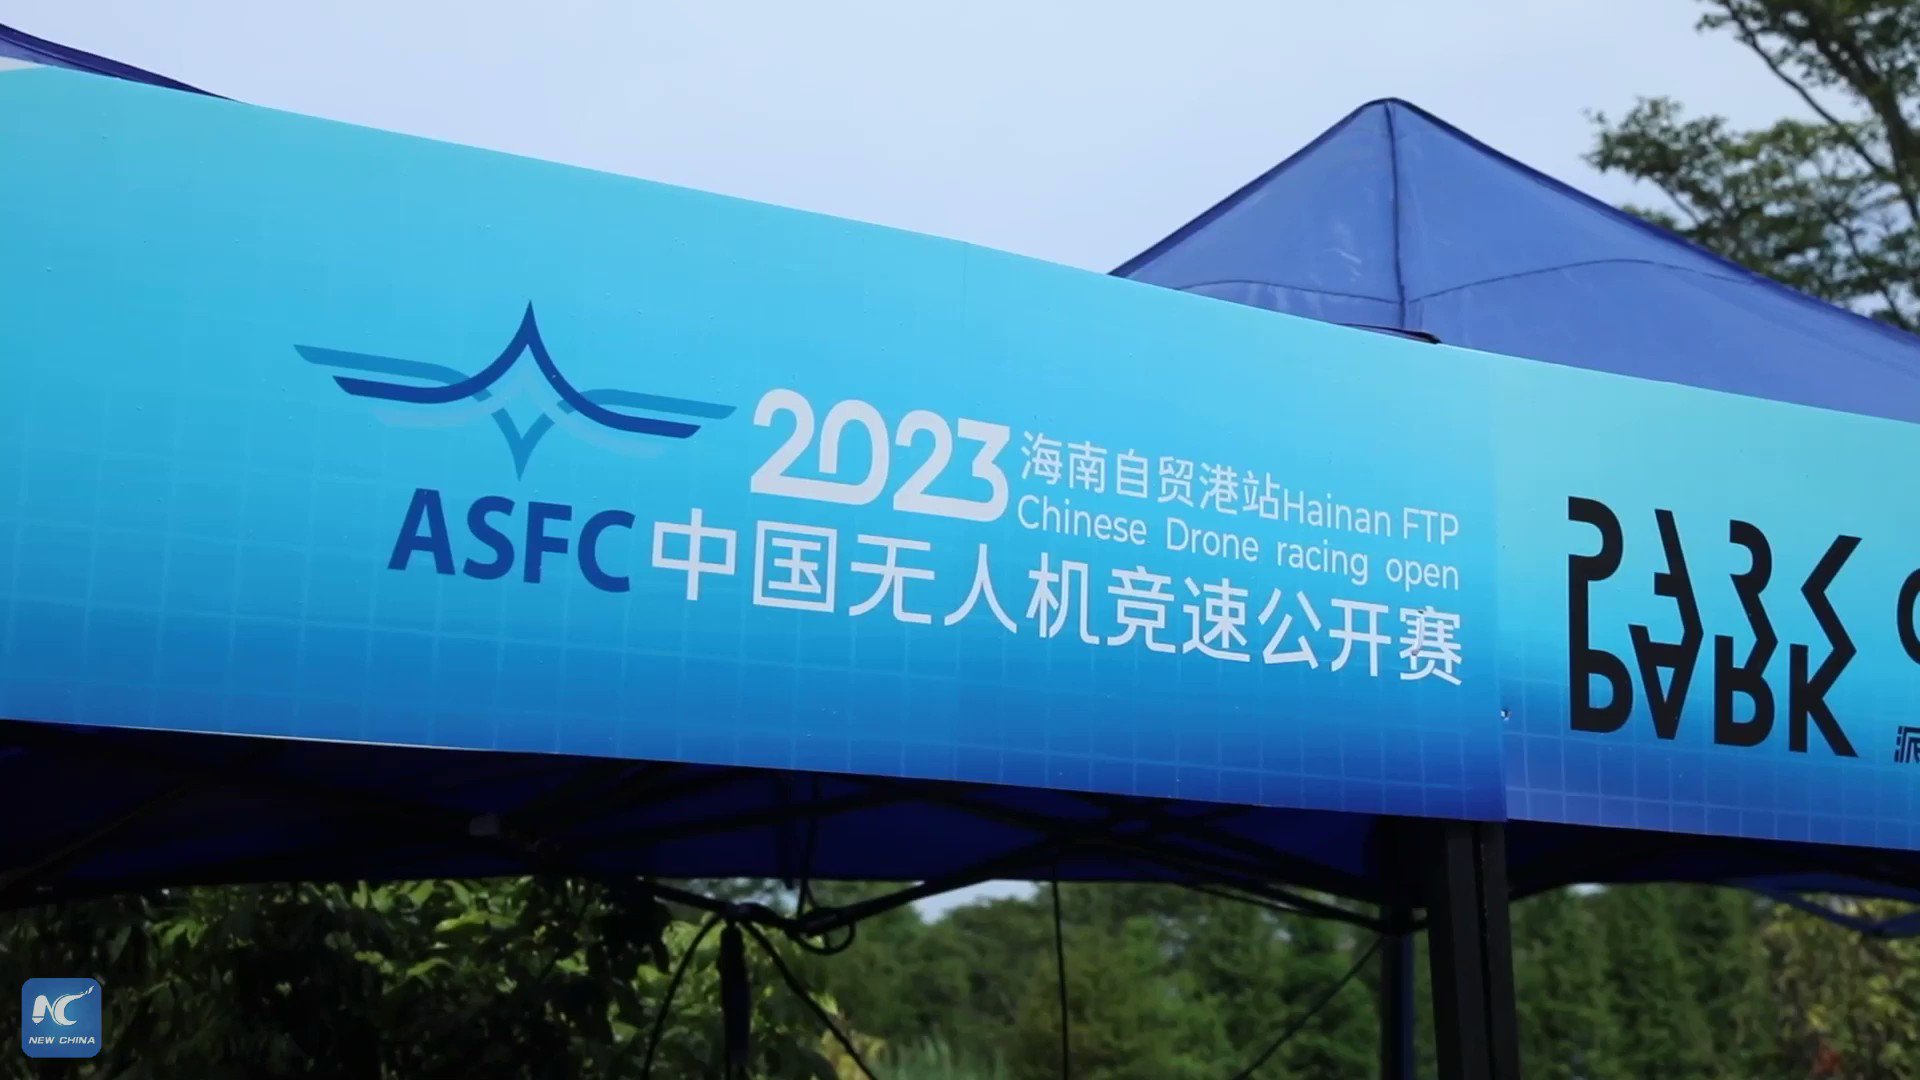 sammensatte Overvåge olie China Xinhua News on Twitter: "The sport of the future: enjoy a whirlwind  of adrenaline-fueled competition and cutting-edge technology at the 2023  Hainan FTP Drone Racing Open. Find out why this new